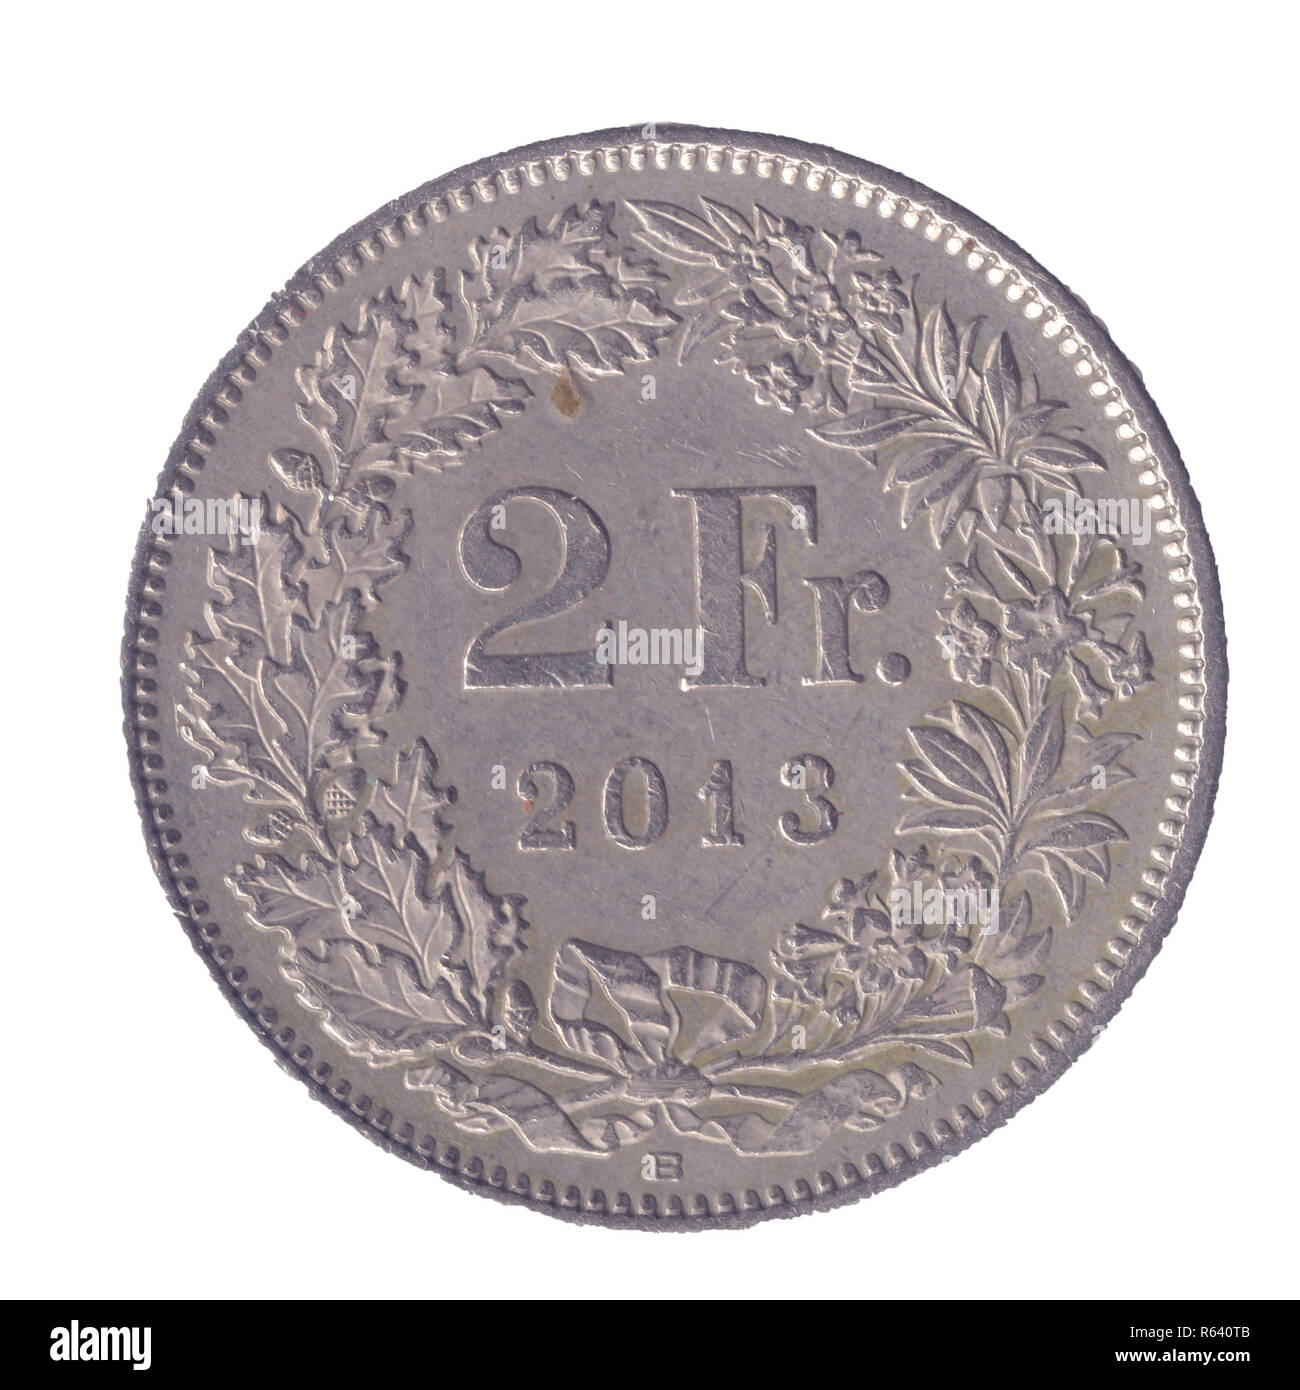 silver Two Swiss Frank coin on white background Stock Photo